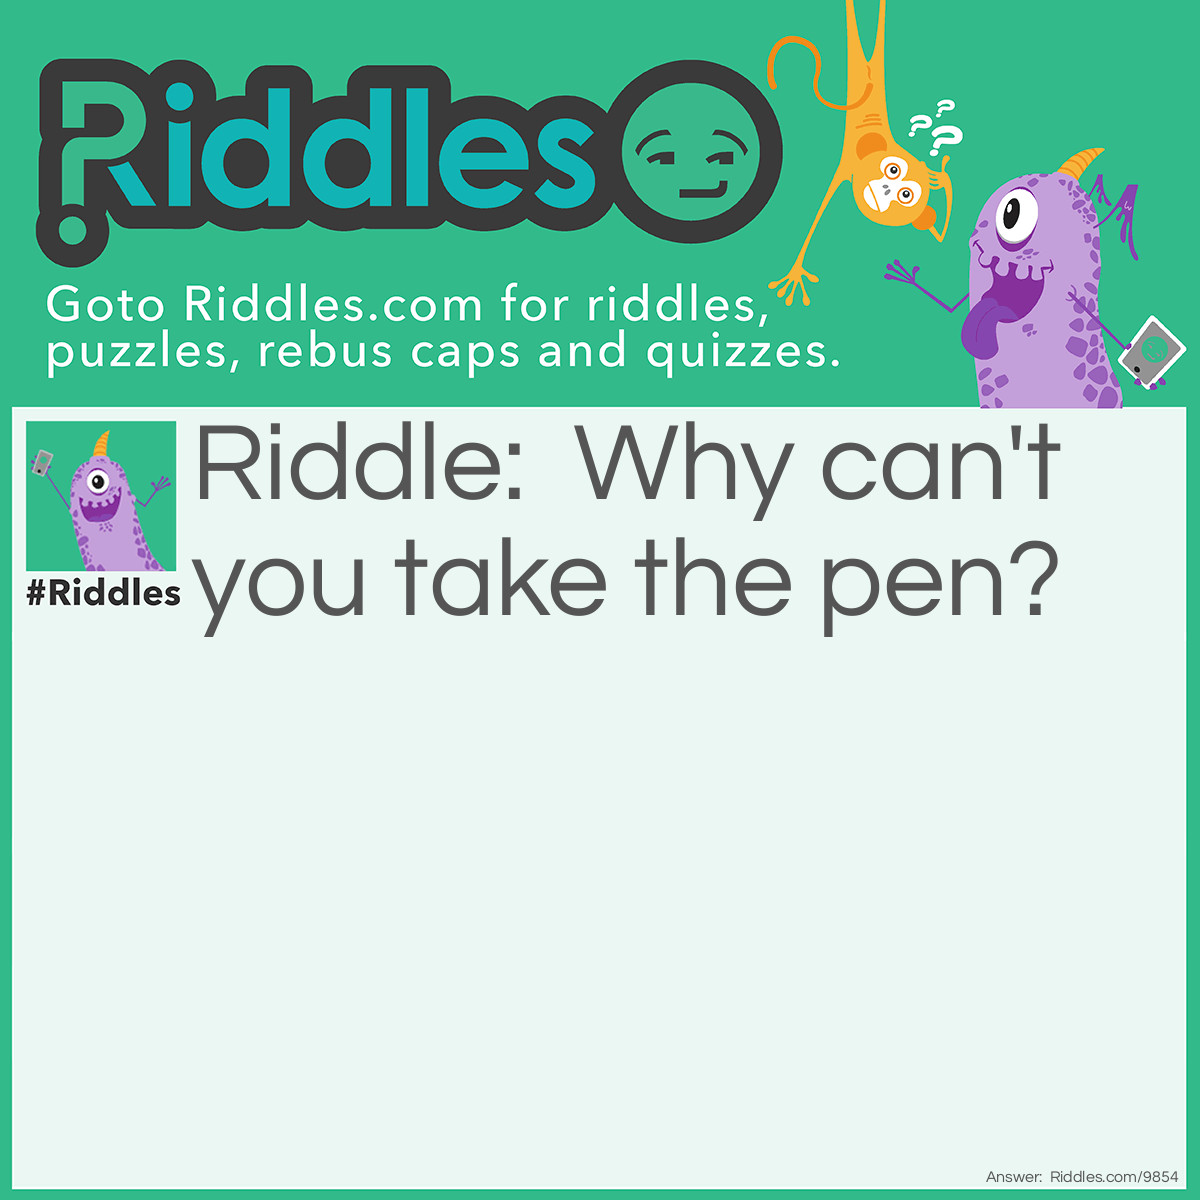 Riddle: Why can't you take the pen? Answer: Because it was tied up to a bulldozer!